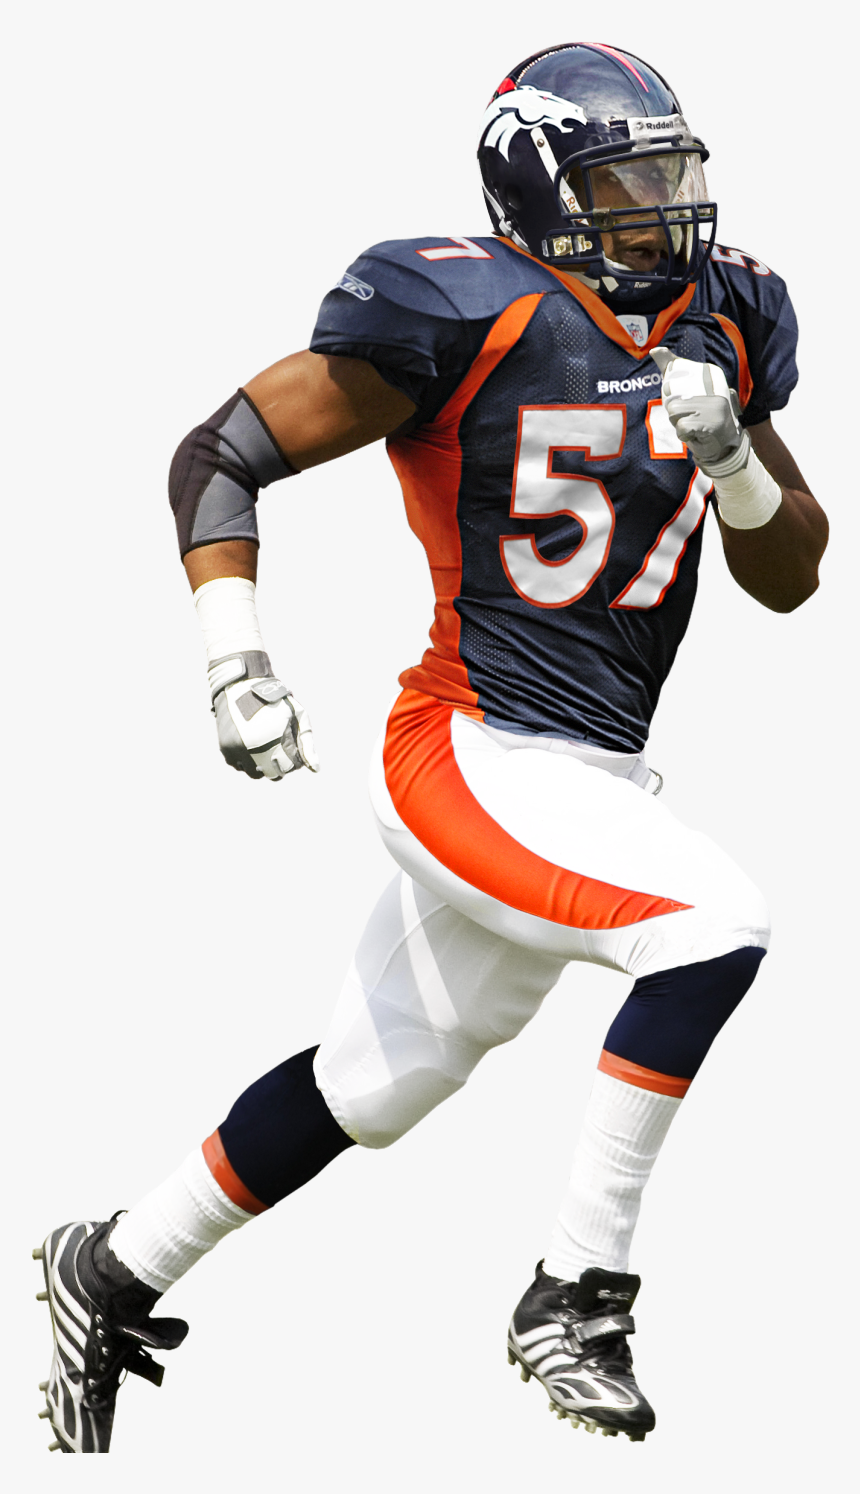 Rugby - Transparent Background Nfl Players Png, Png Download, Free Download